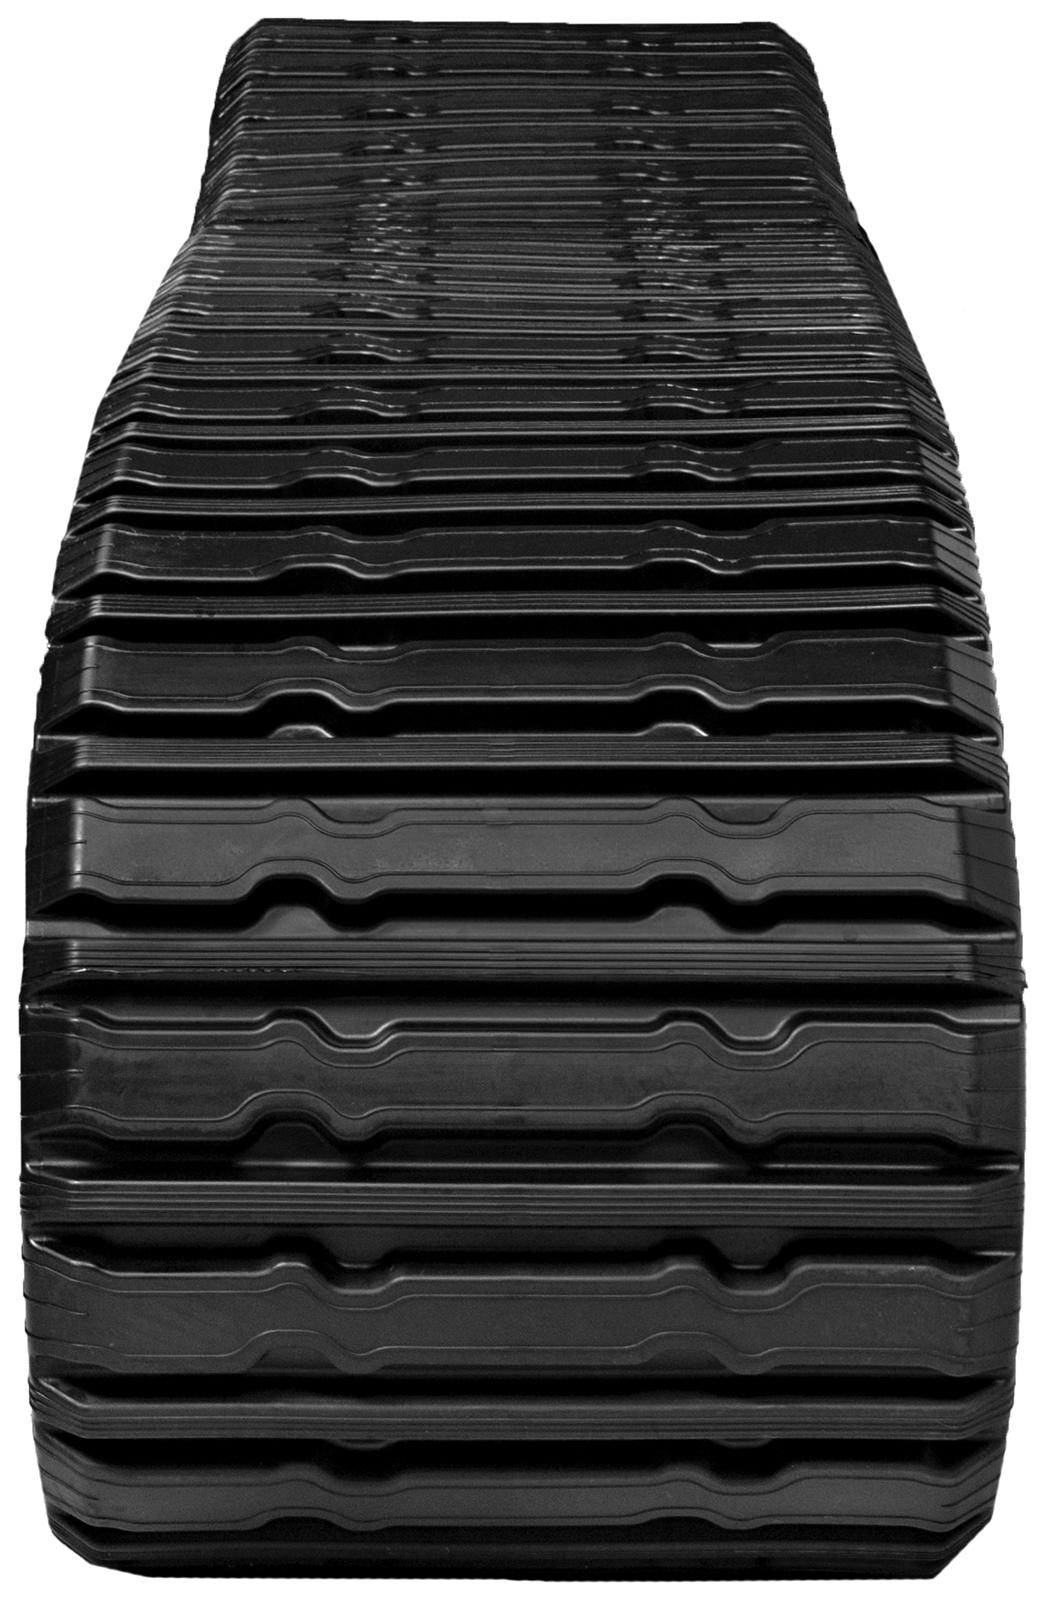 set of 2 18" camso extreme duty hxd pattern rubber track (457x101.6x51)